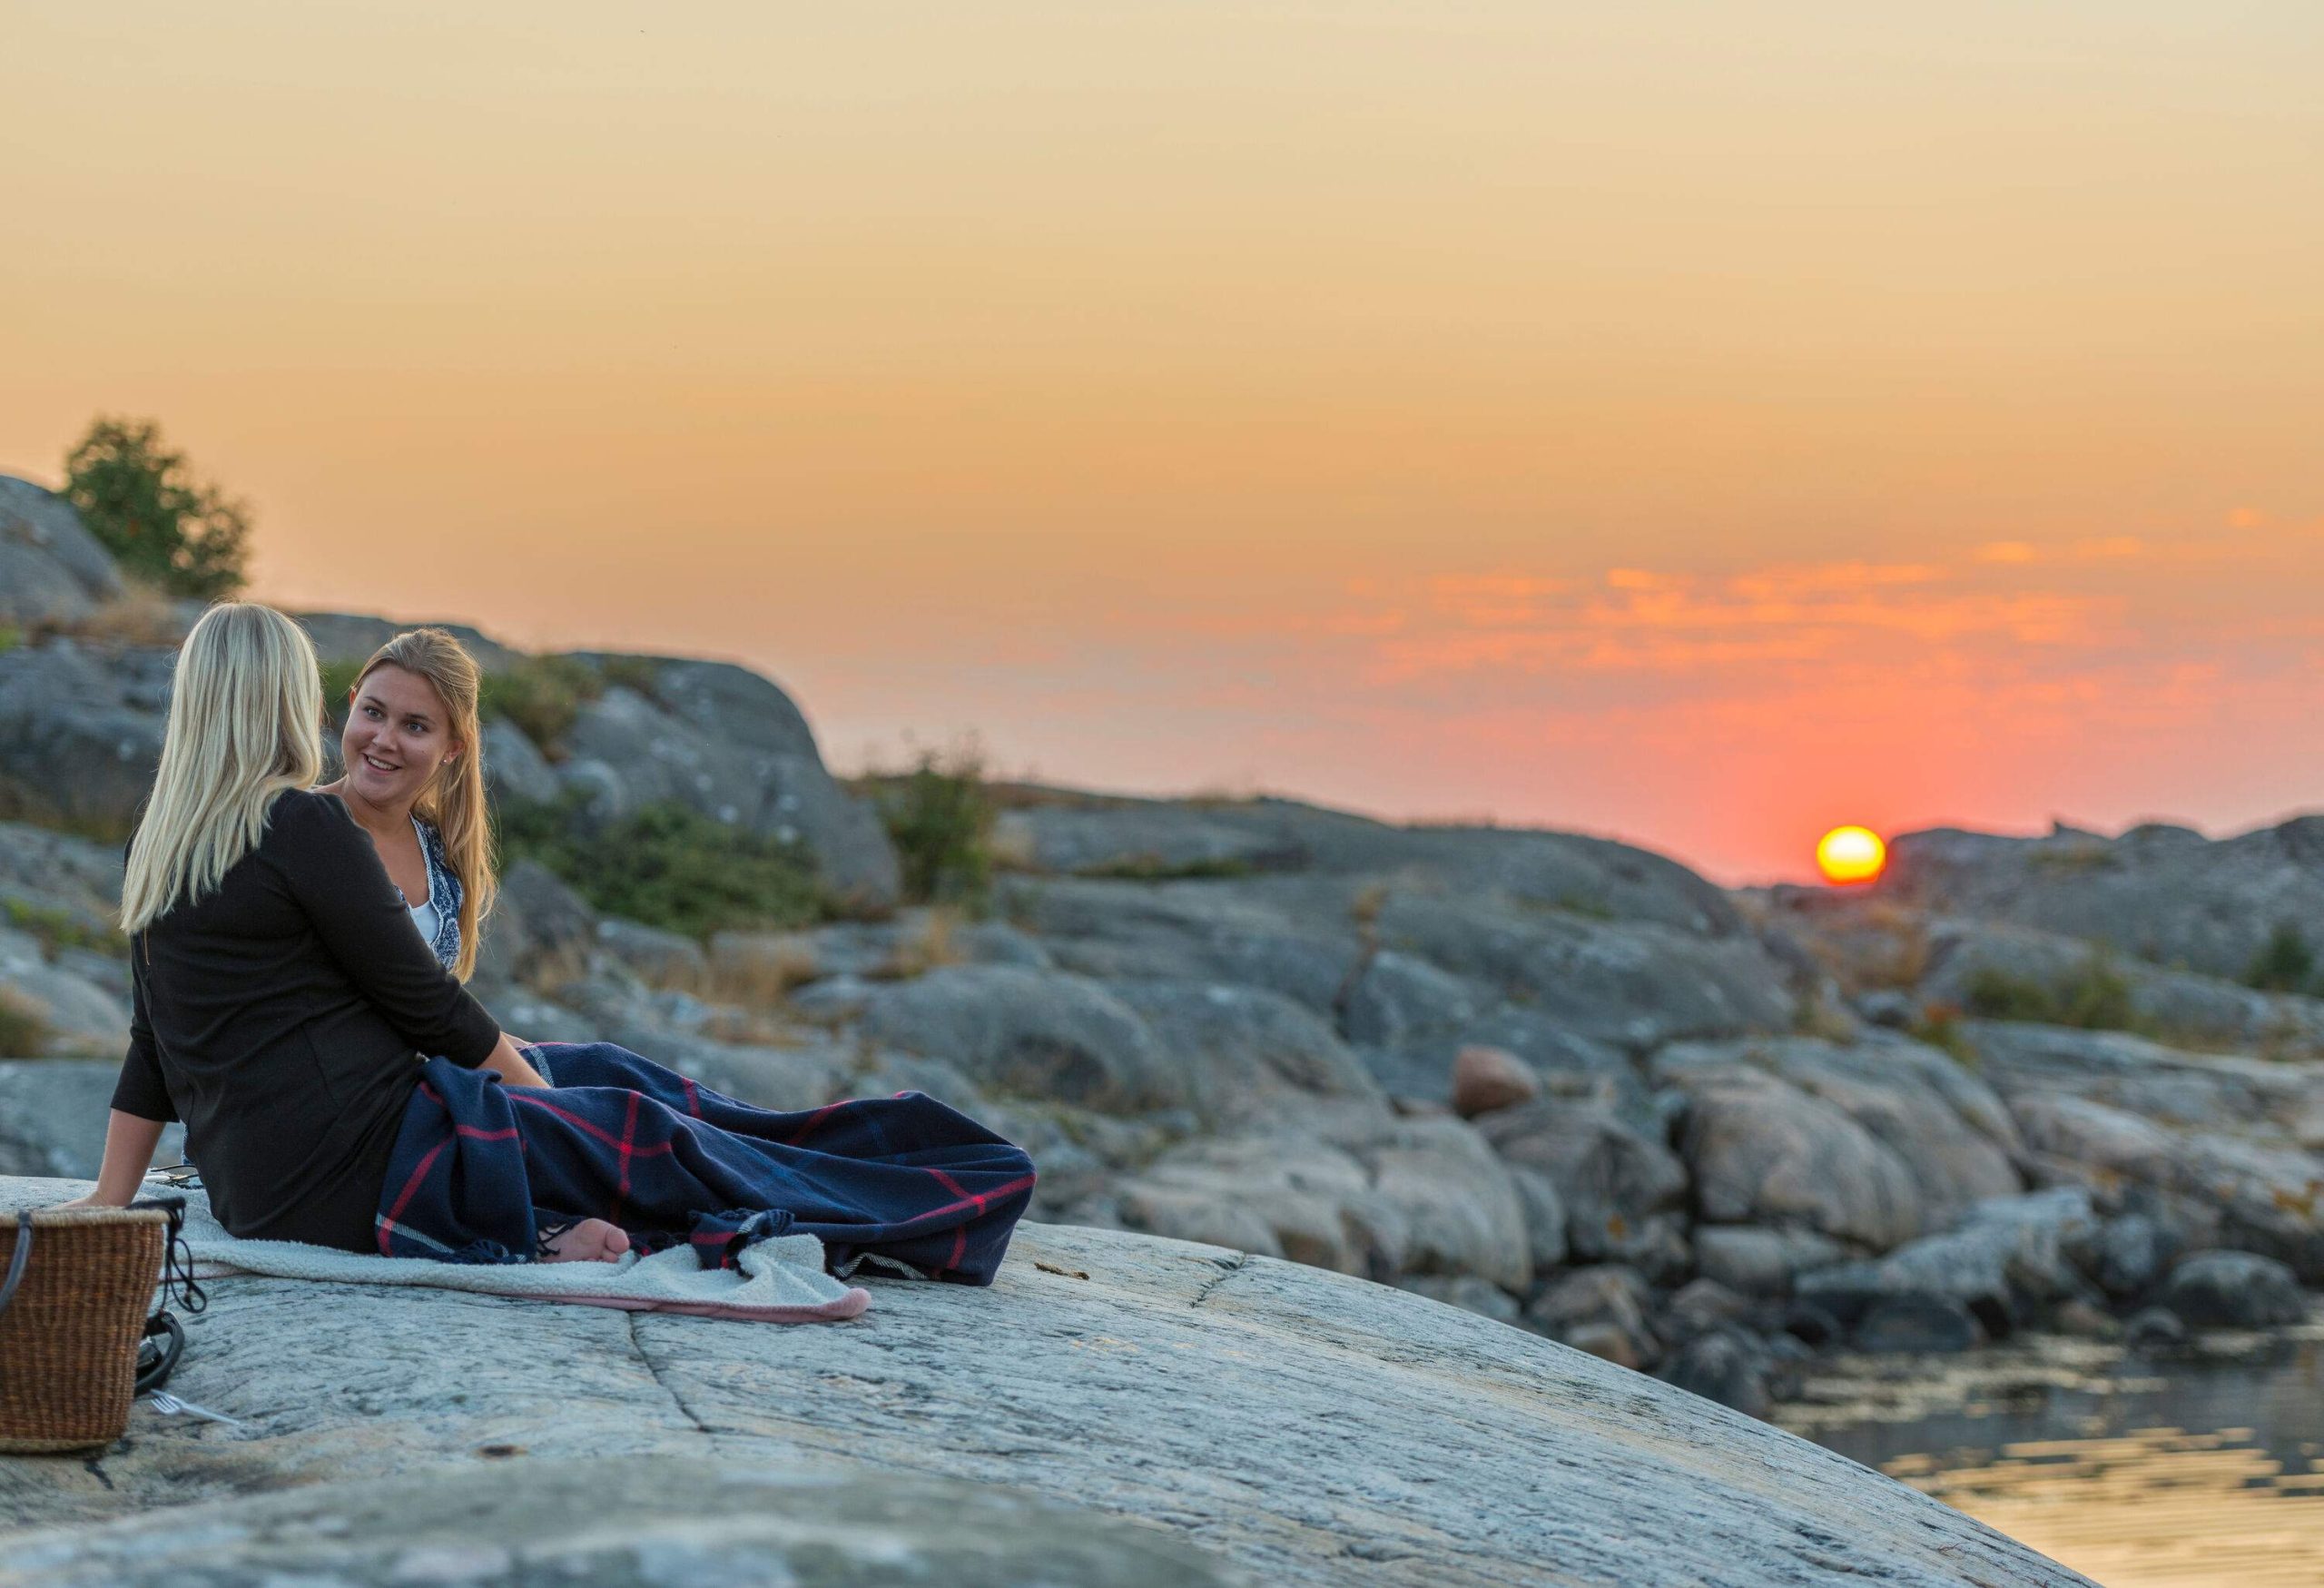 Two women are picnicking on a large boulder against a stone background at sundown.